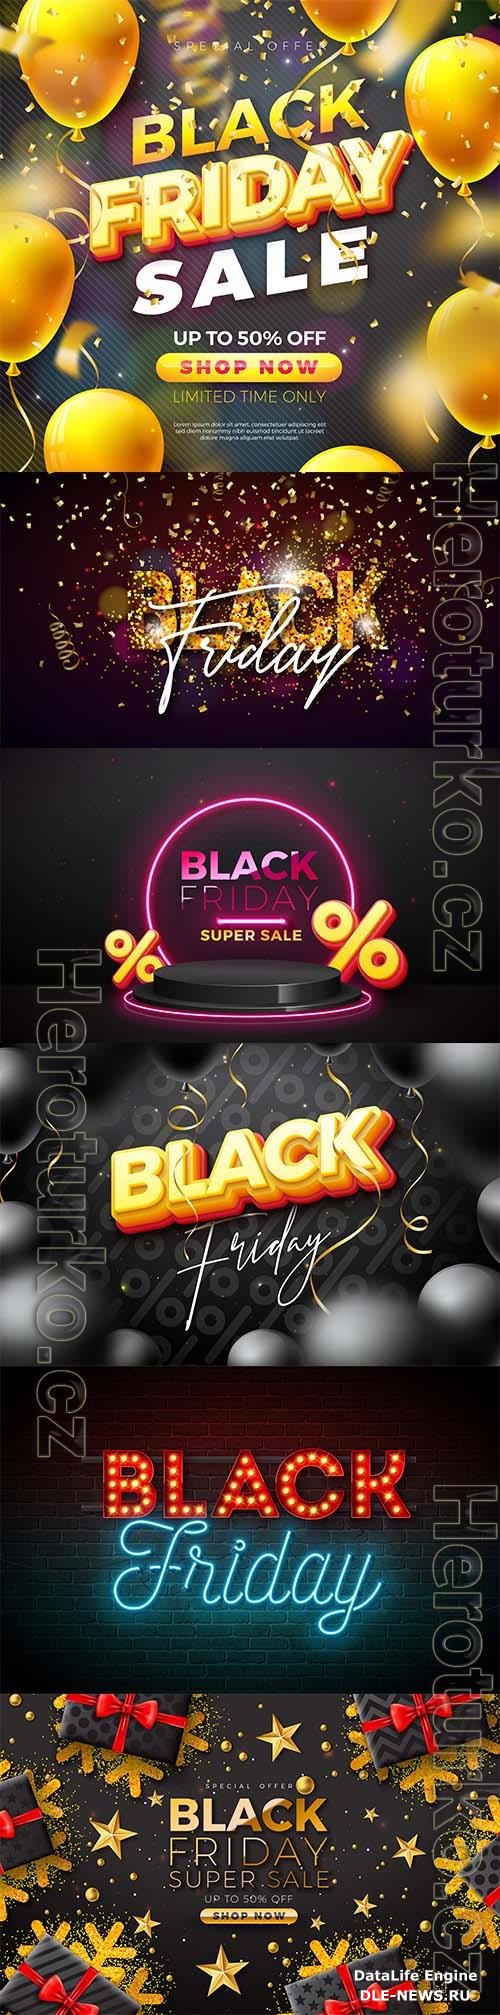 Black friday sale vector illustration with text lettering